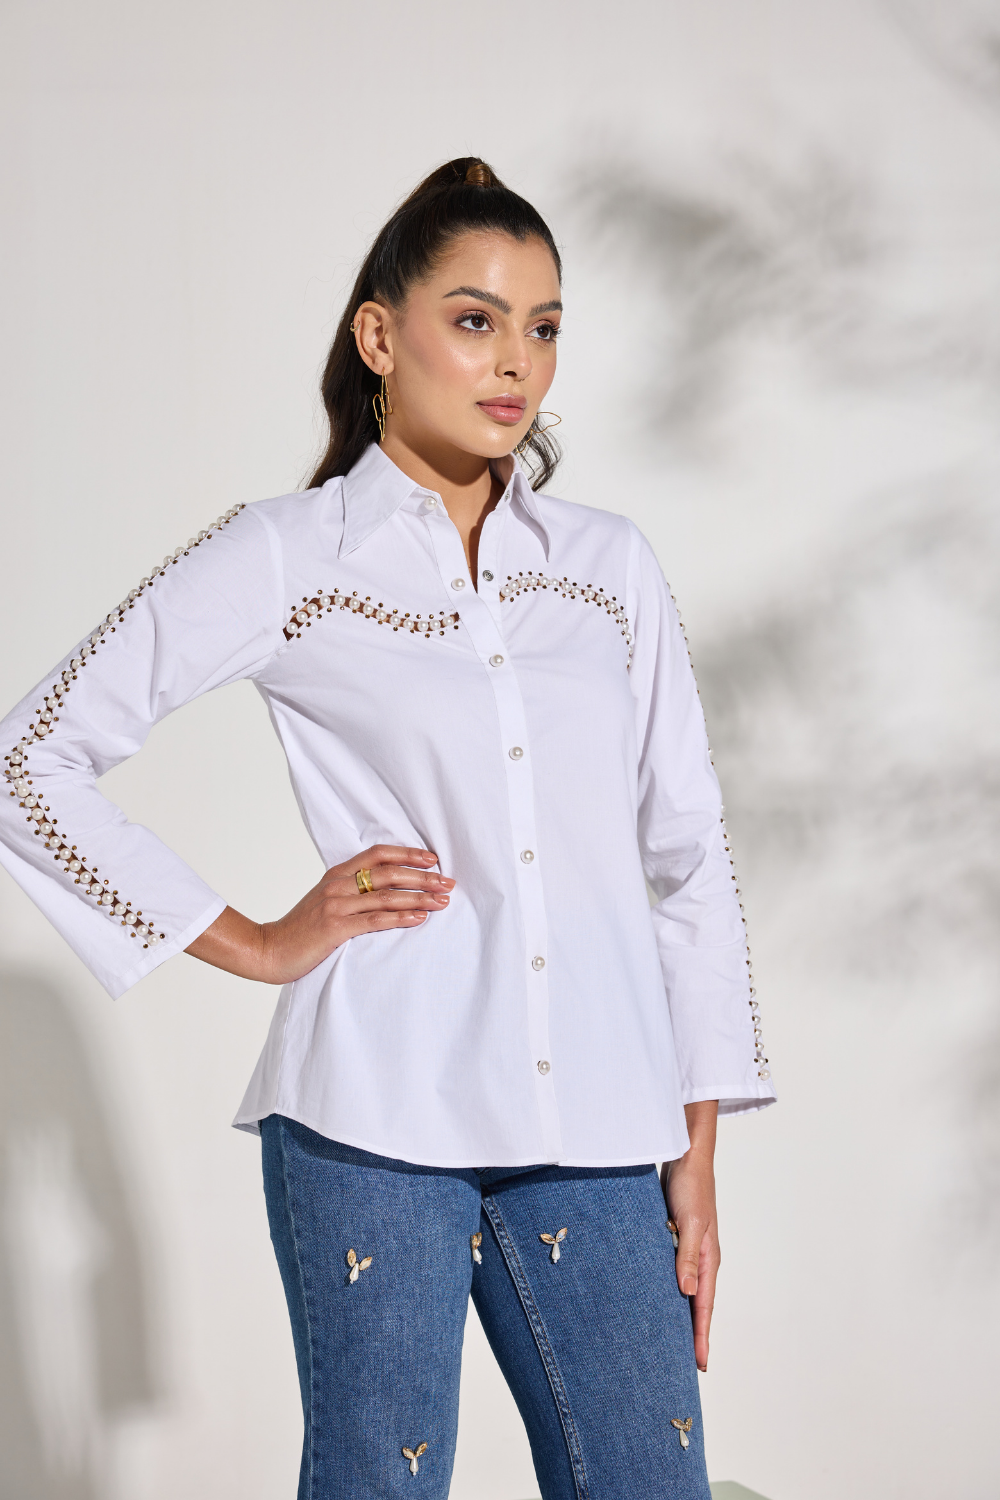 White Pearl Shirt, a product by Saltz n sand 